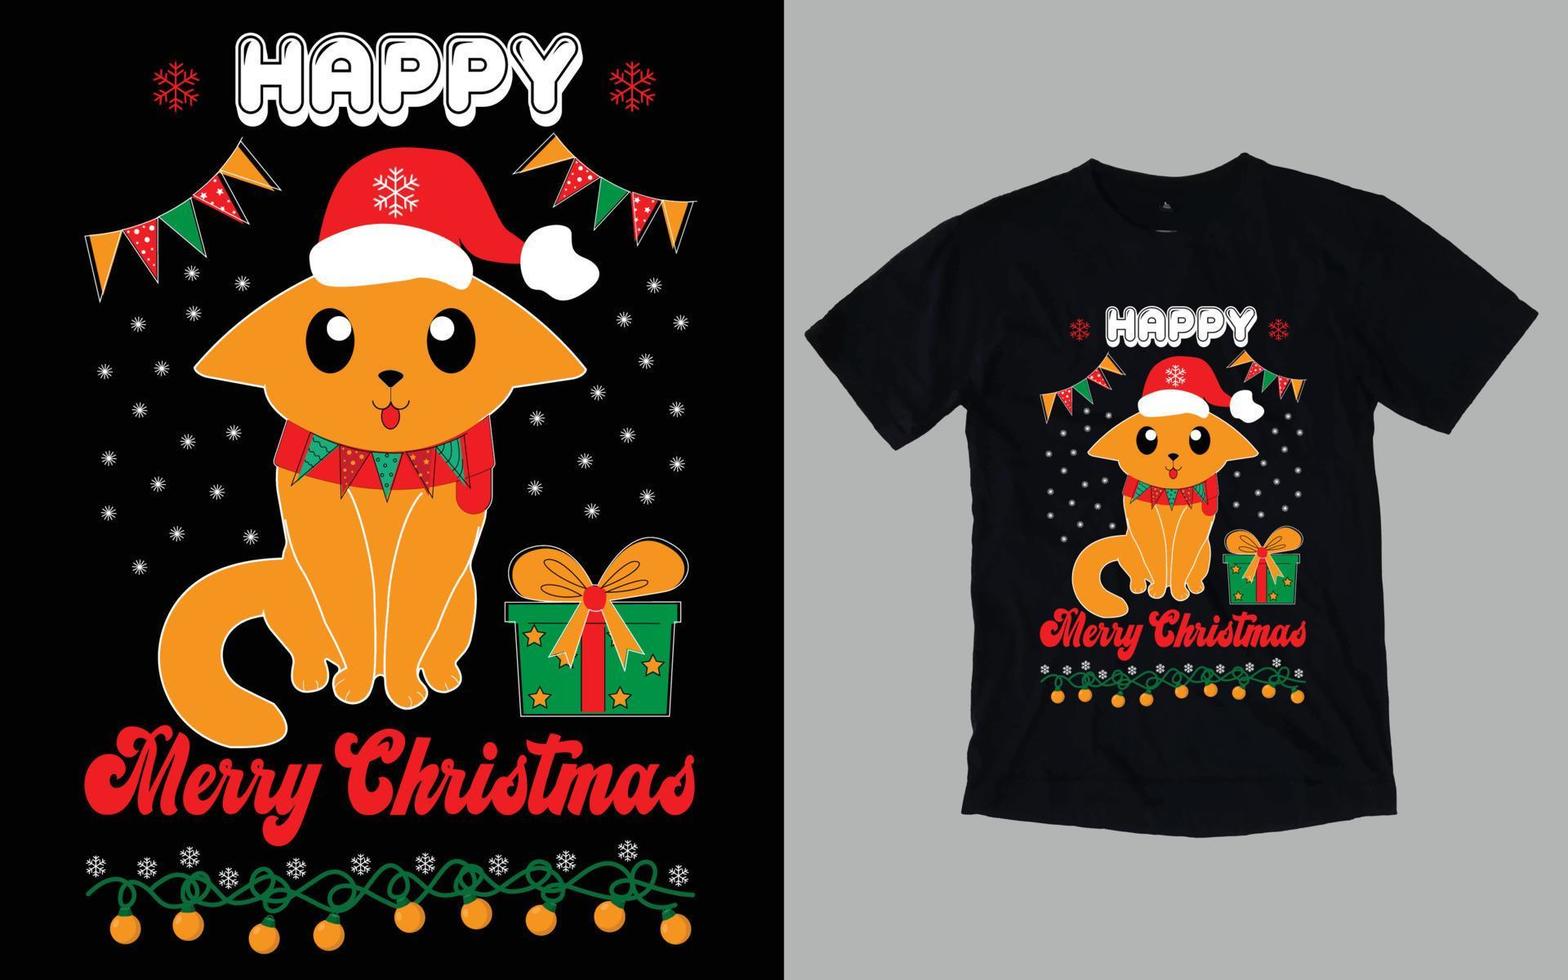 Christmas Day Typography and Graphic T-shirt Design vector